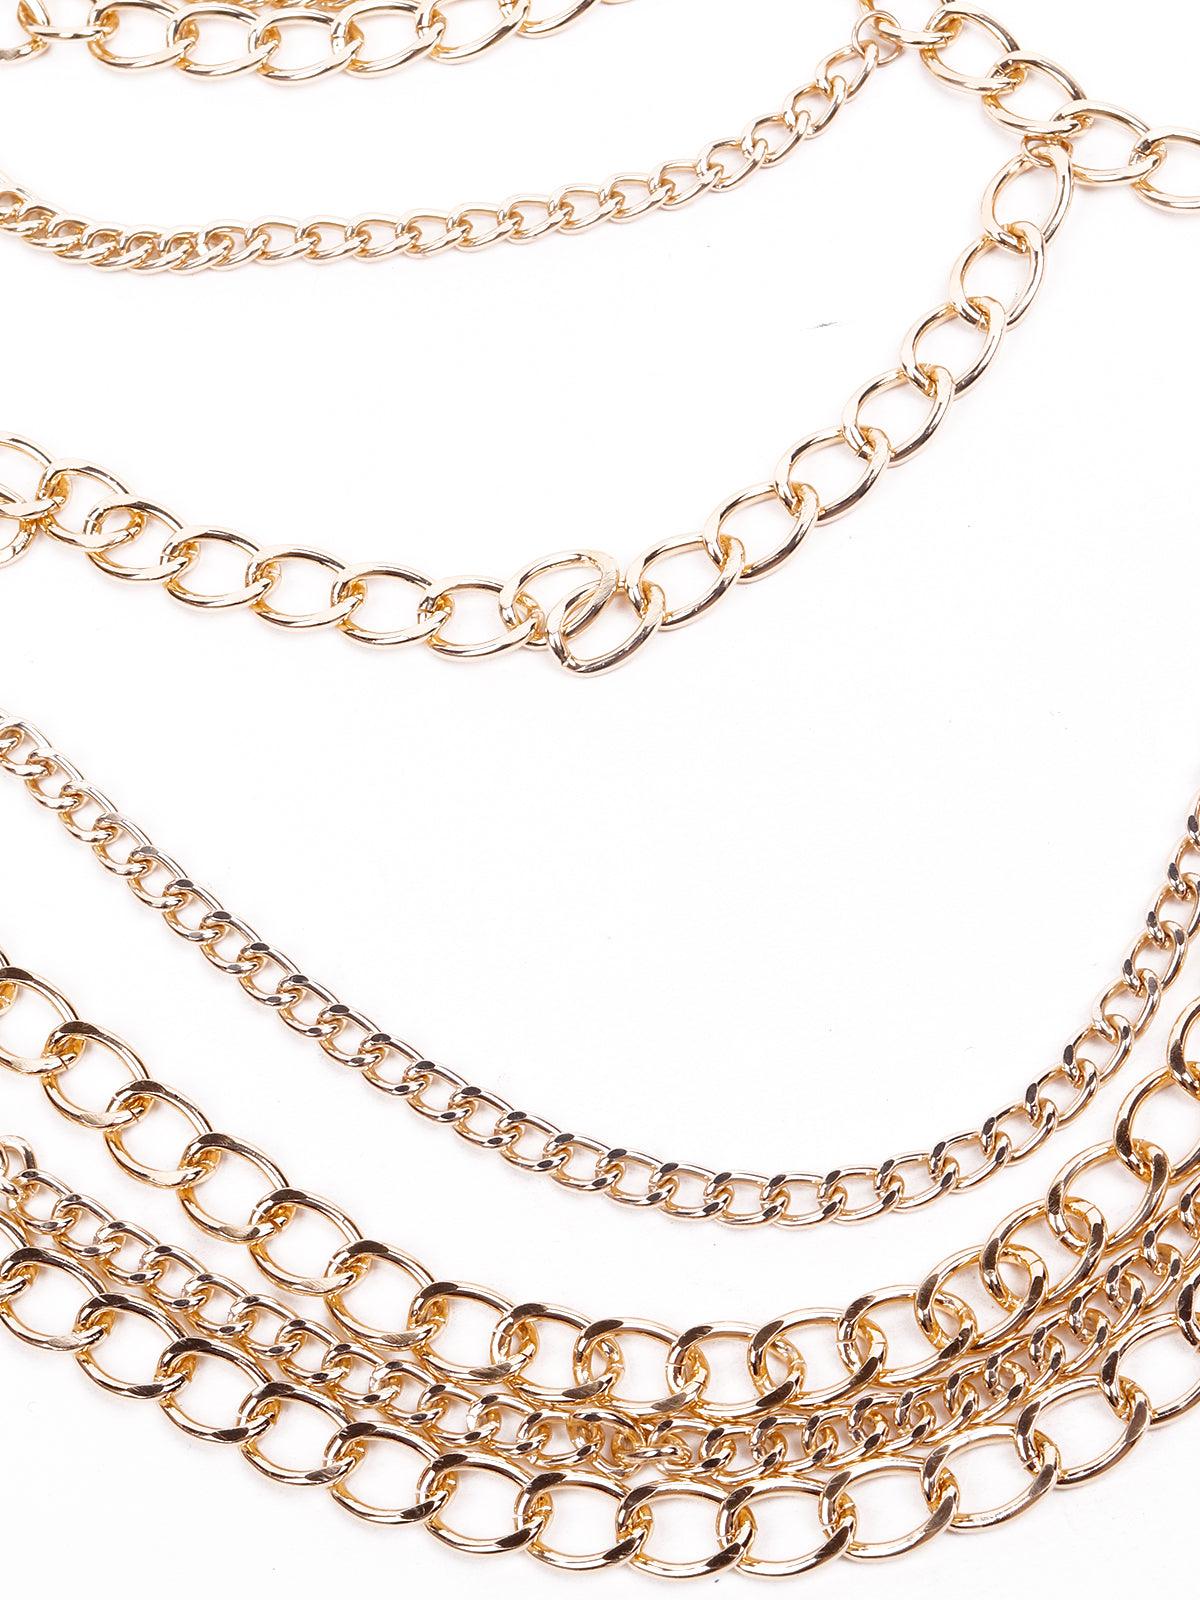 Women's Multilayered Gold Tone Necklace - Odette